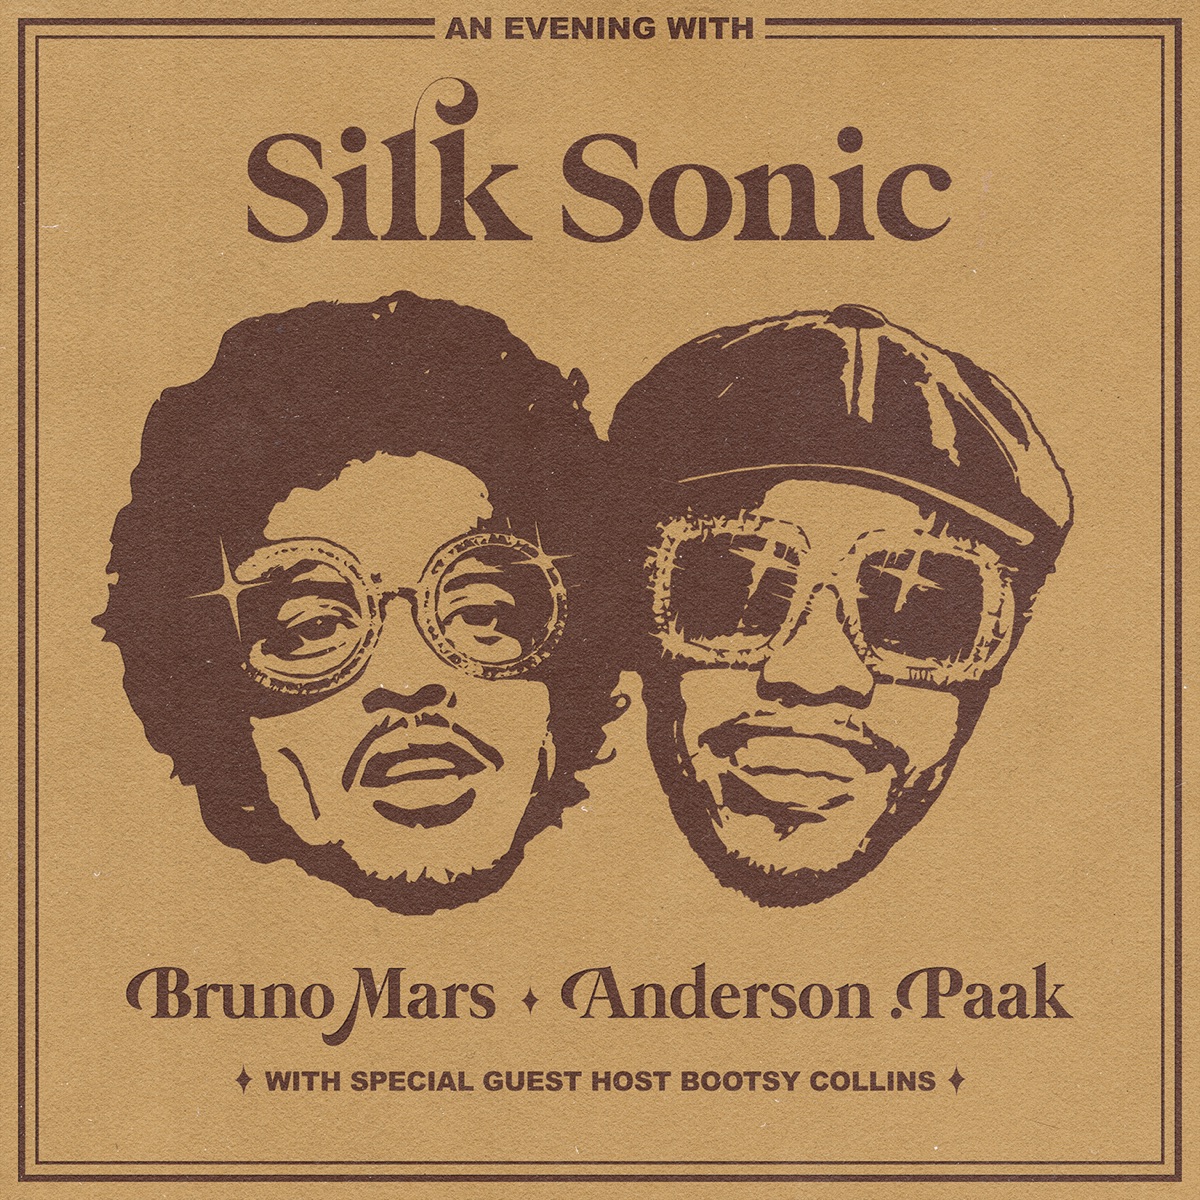 Cover for『Bruno Mars, Anderson .Paak, Silk Sonic - Put On a Smile』from the release『An Evening With Silk Sonic 』